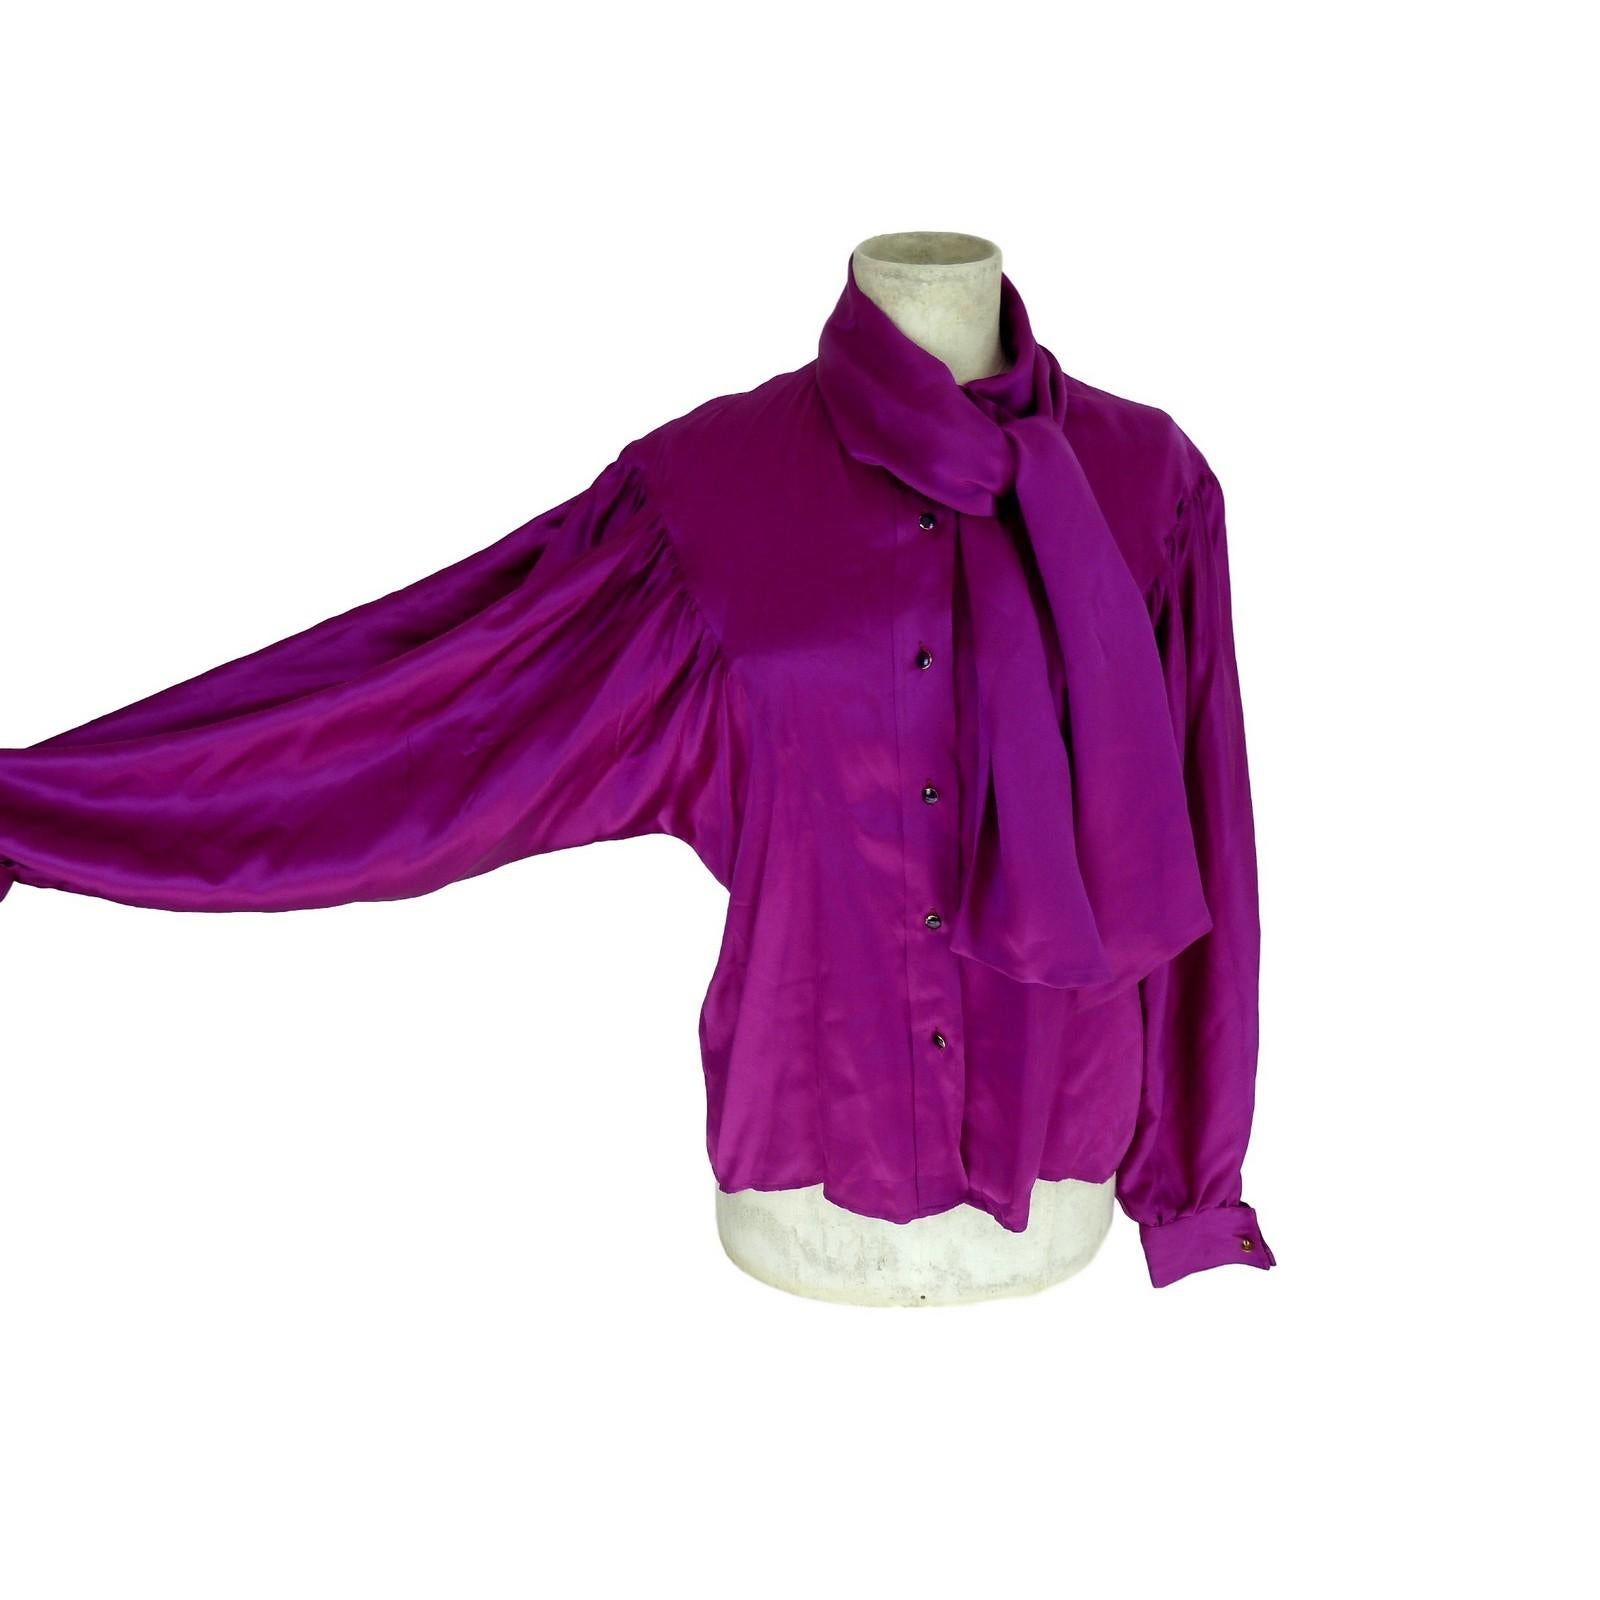 Thierry Mugler vintage shirt for women, purple, 100% silk. Soft model with batwing sleeves, high collar with bow. 1980s. Made in Italy. Excellent vintage conditions.
Size 42 IT 8 US 10 UK

Shoulder: 43 cm
Bust/Chest: 53 cm
Sleeve: 66 cm
Length: 66 cm